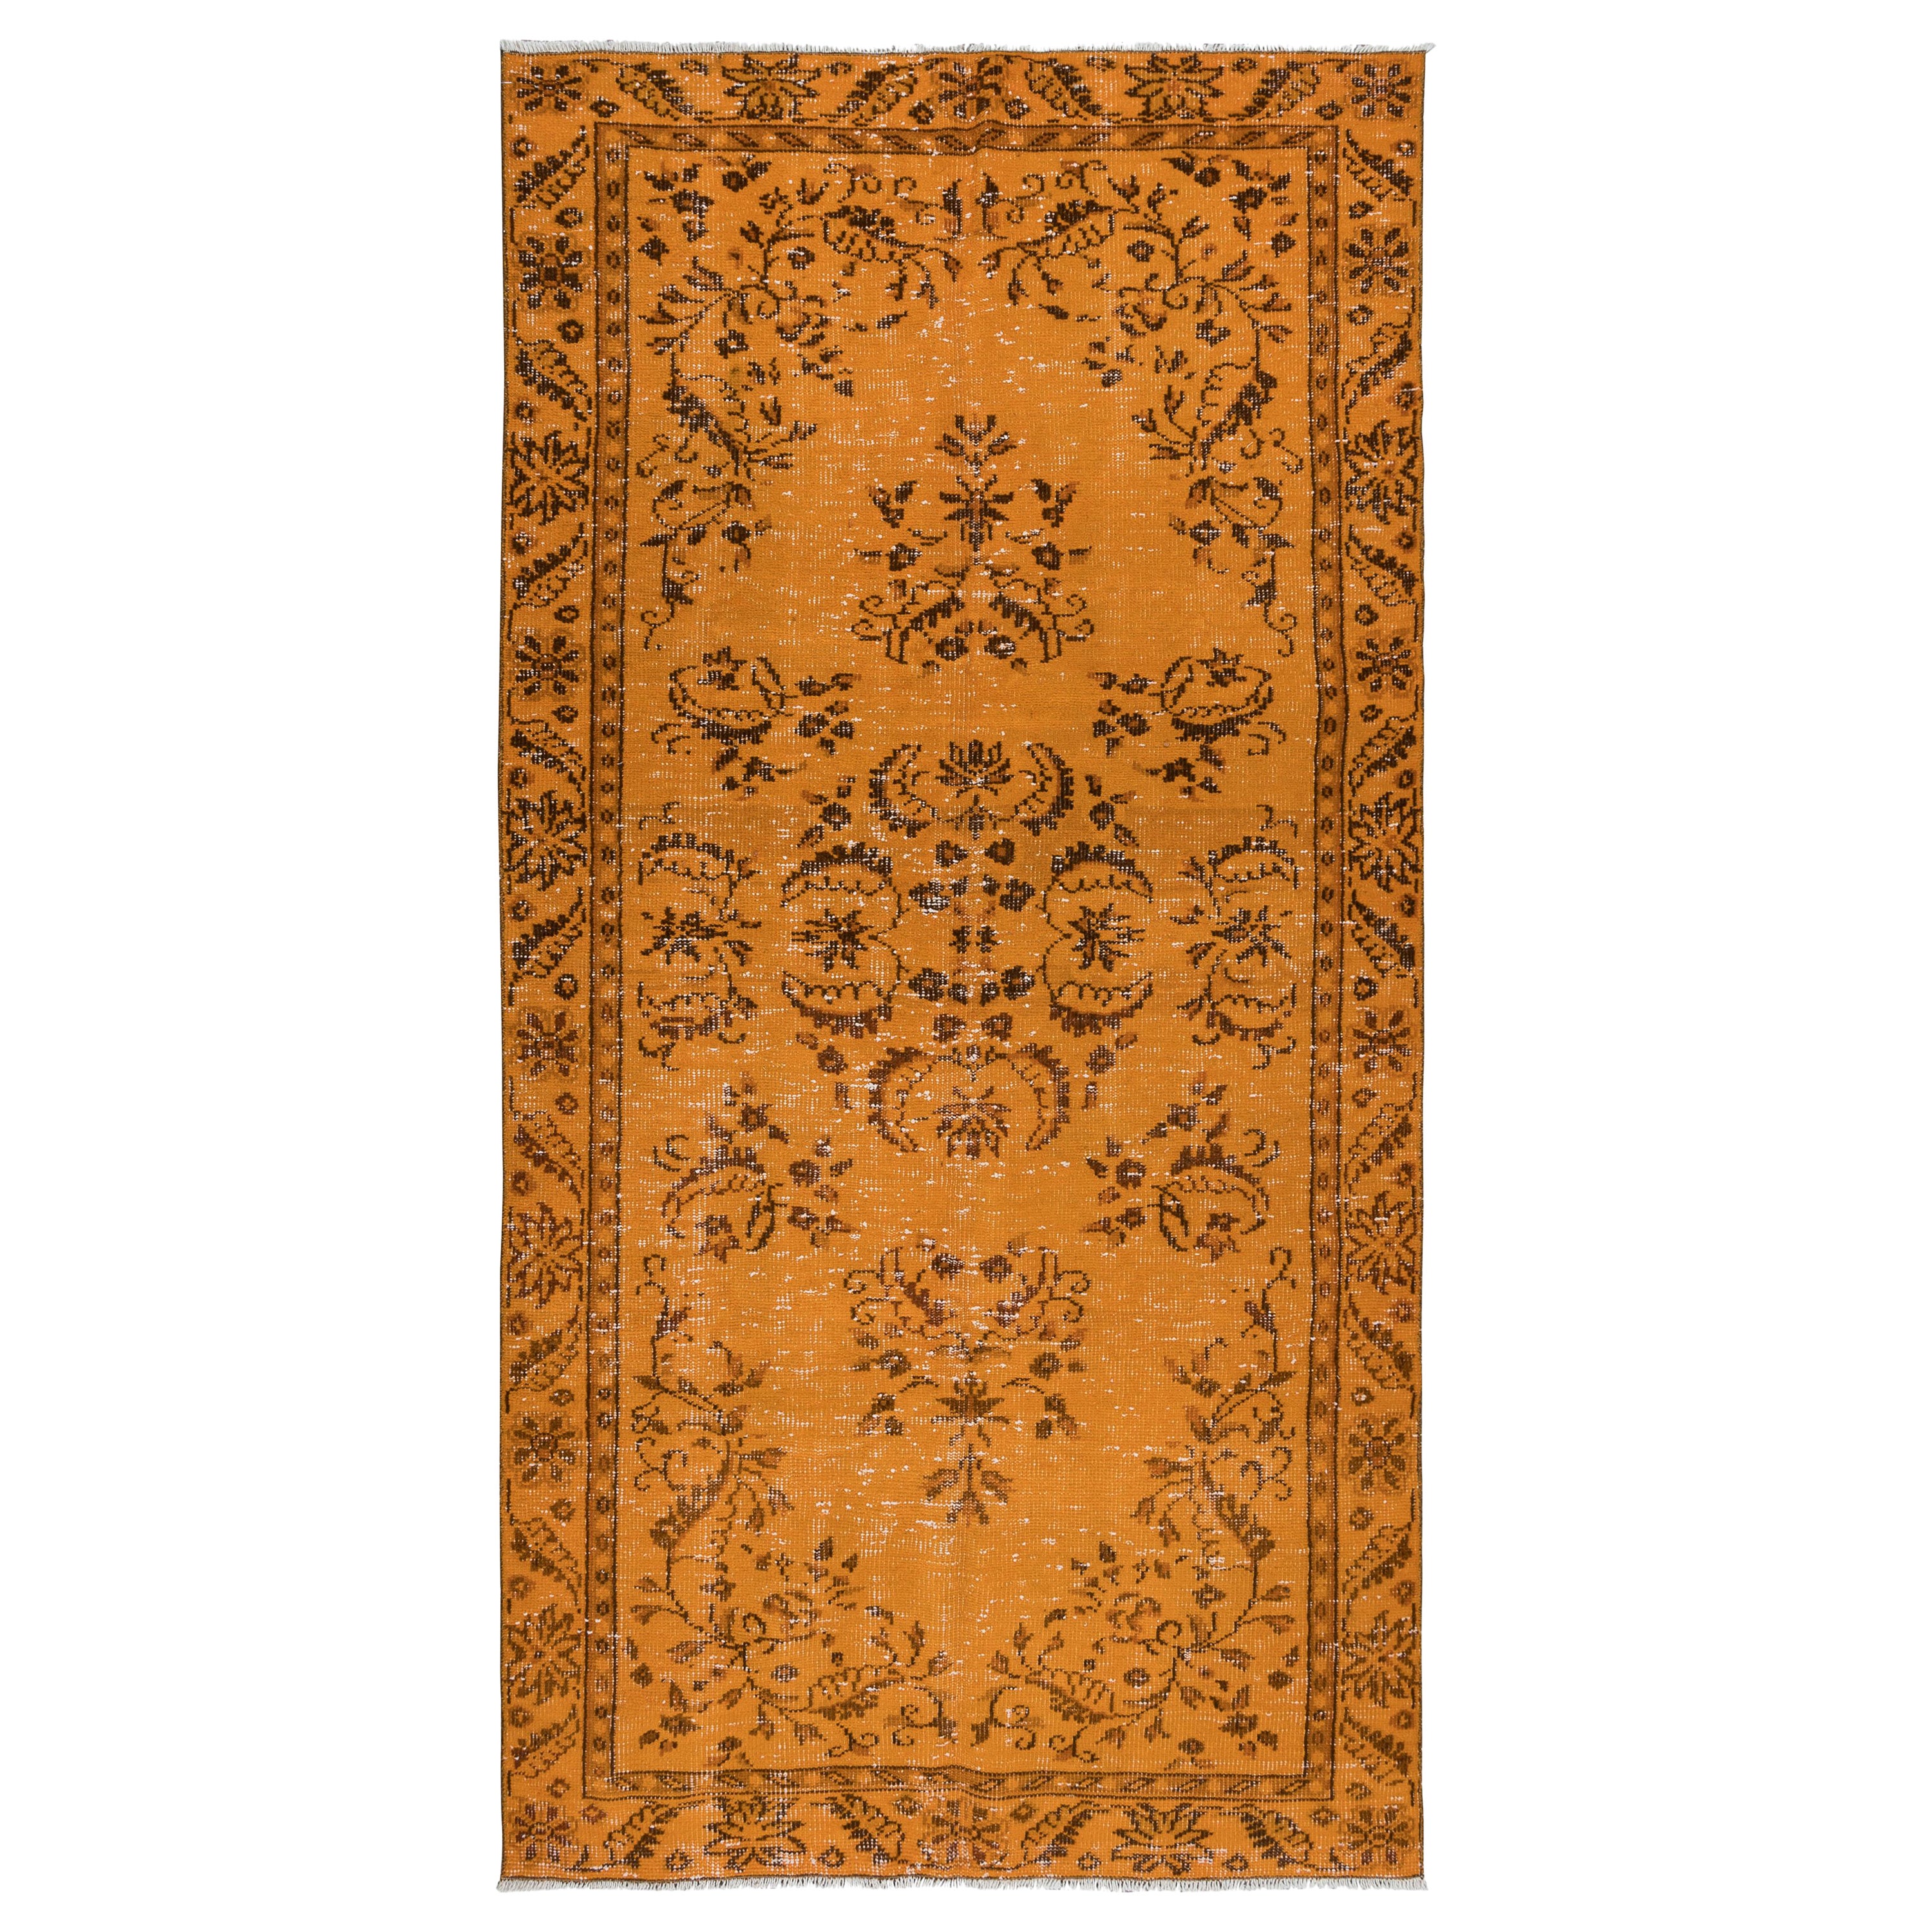 4.5x8.7 Ft Orange Area Rug From Turkey, Hand Knotted Contemporary Carpet